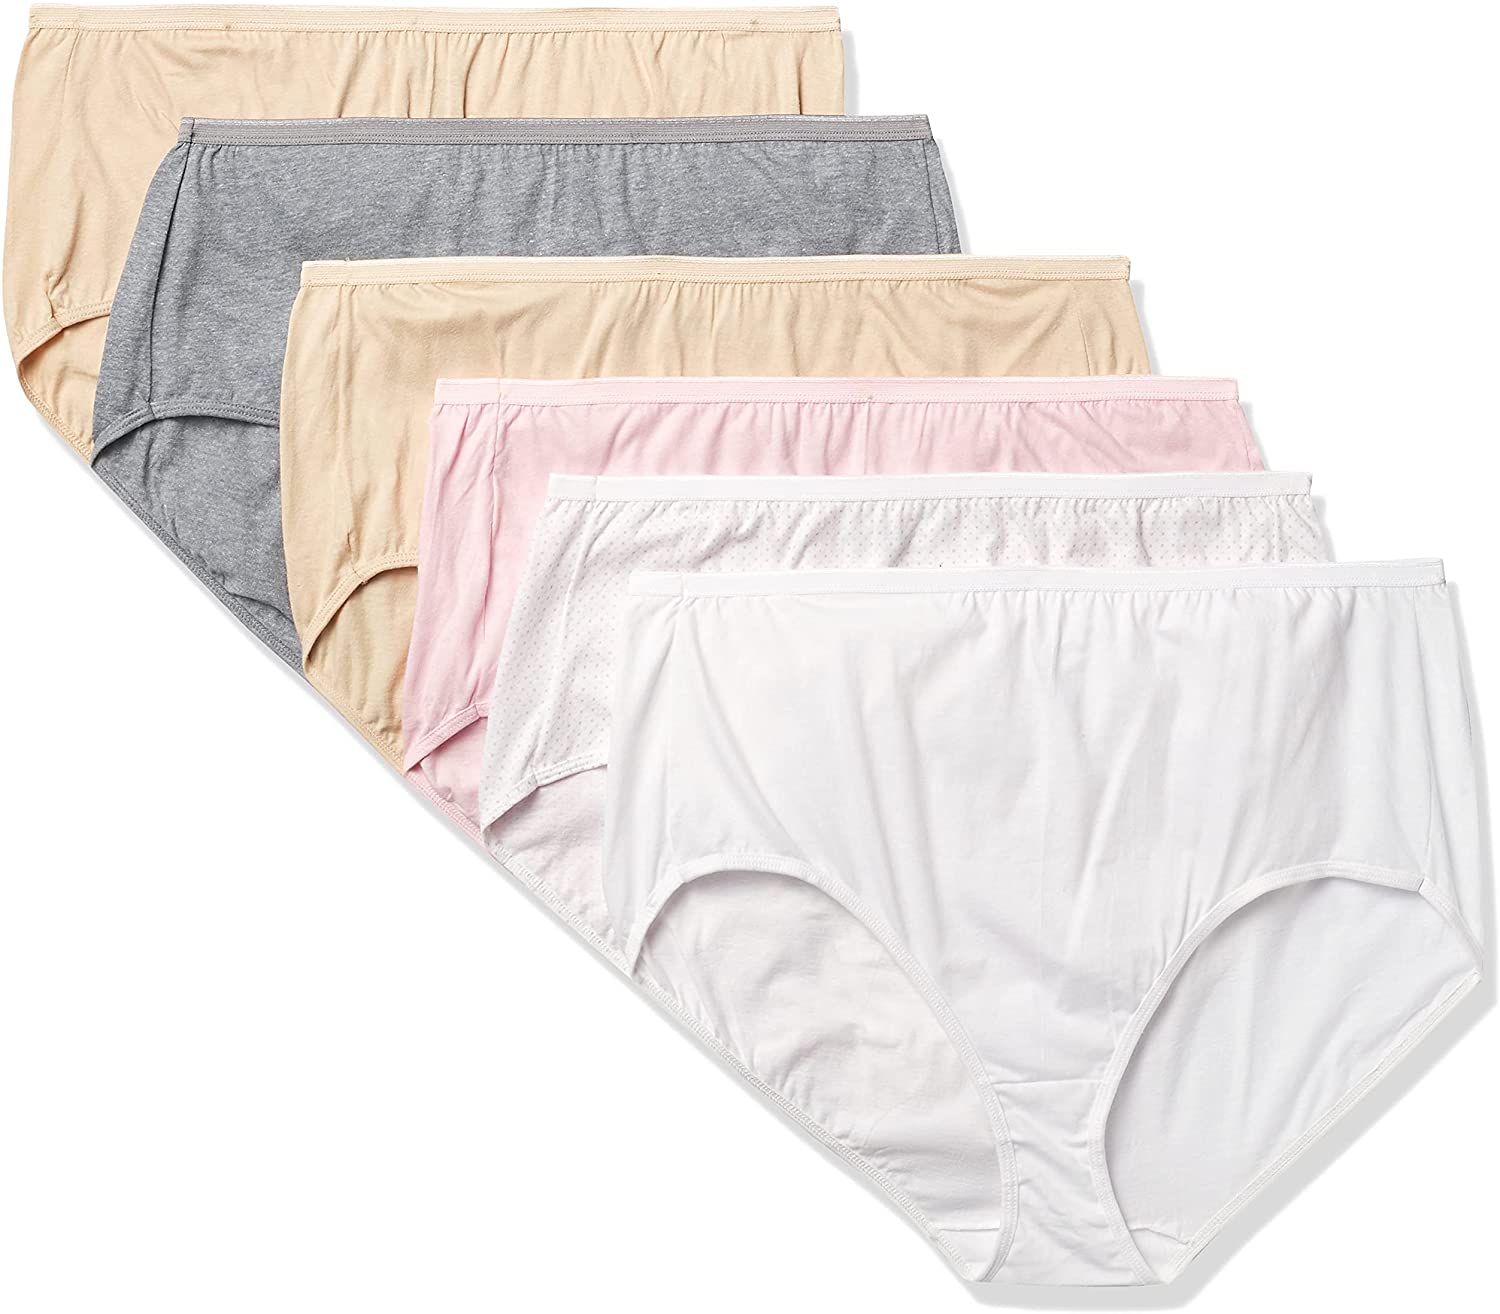  Just My Size Womens Plus Size Cool Comfort Cotton Brief  6-Pack